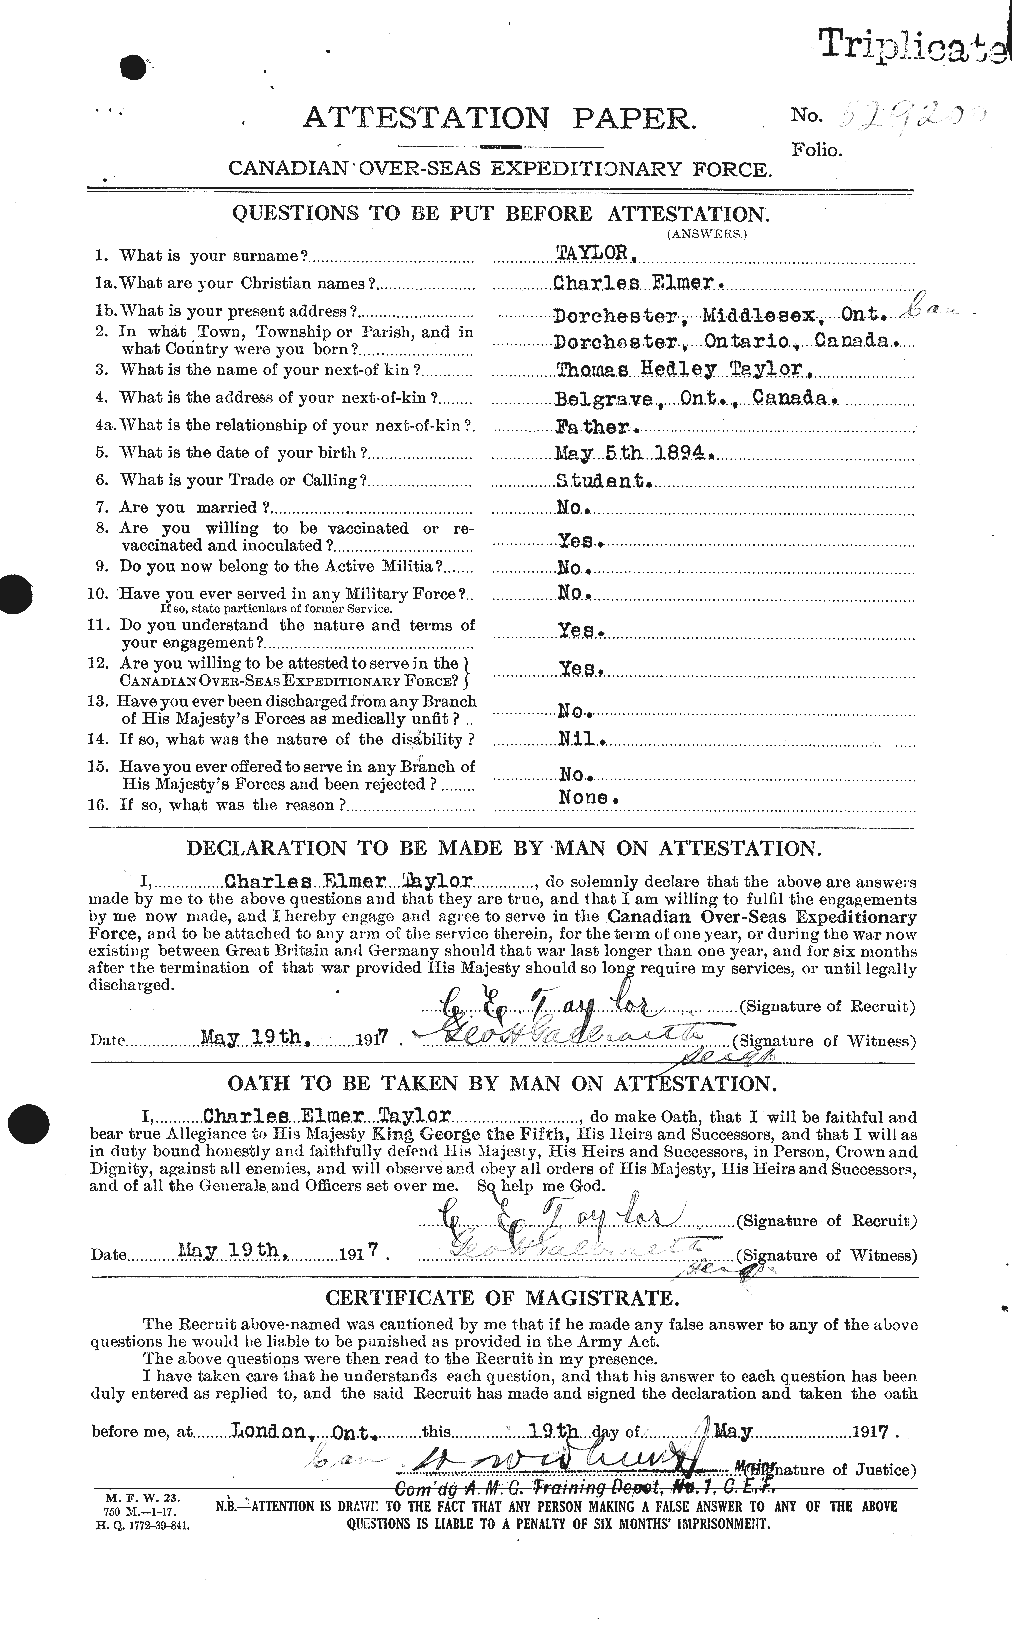 Personnel Records of the First World War - CEF 626838a